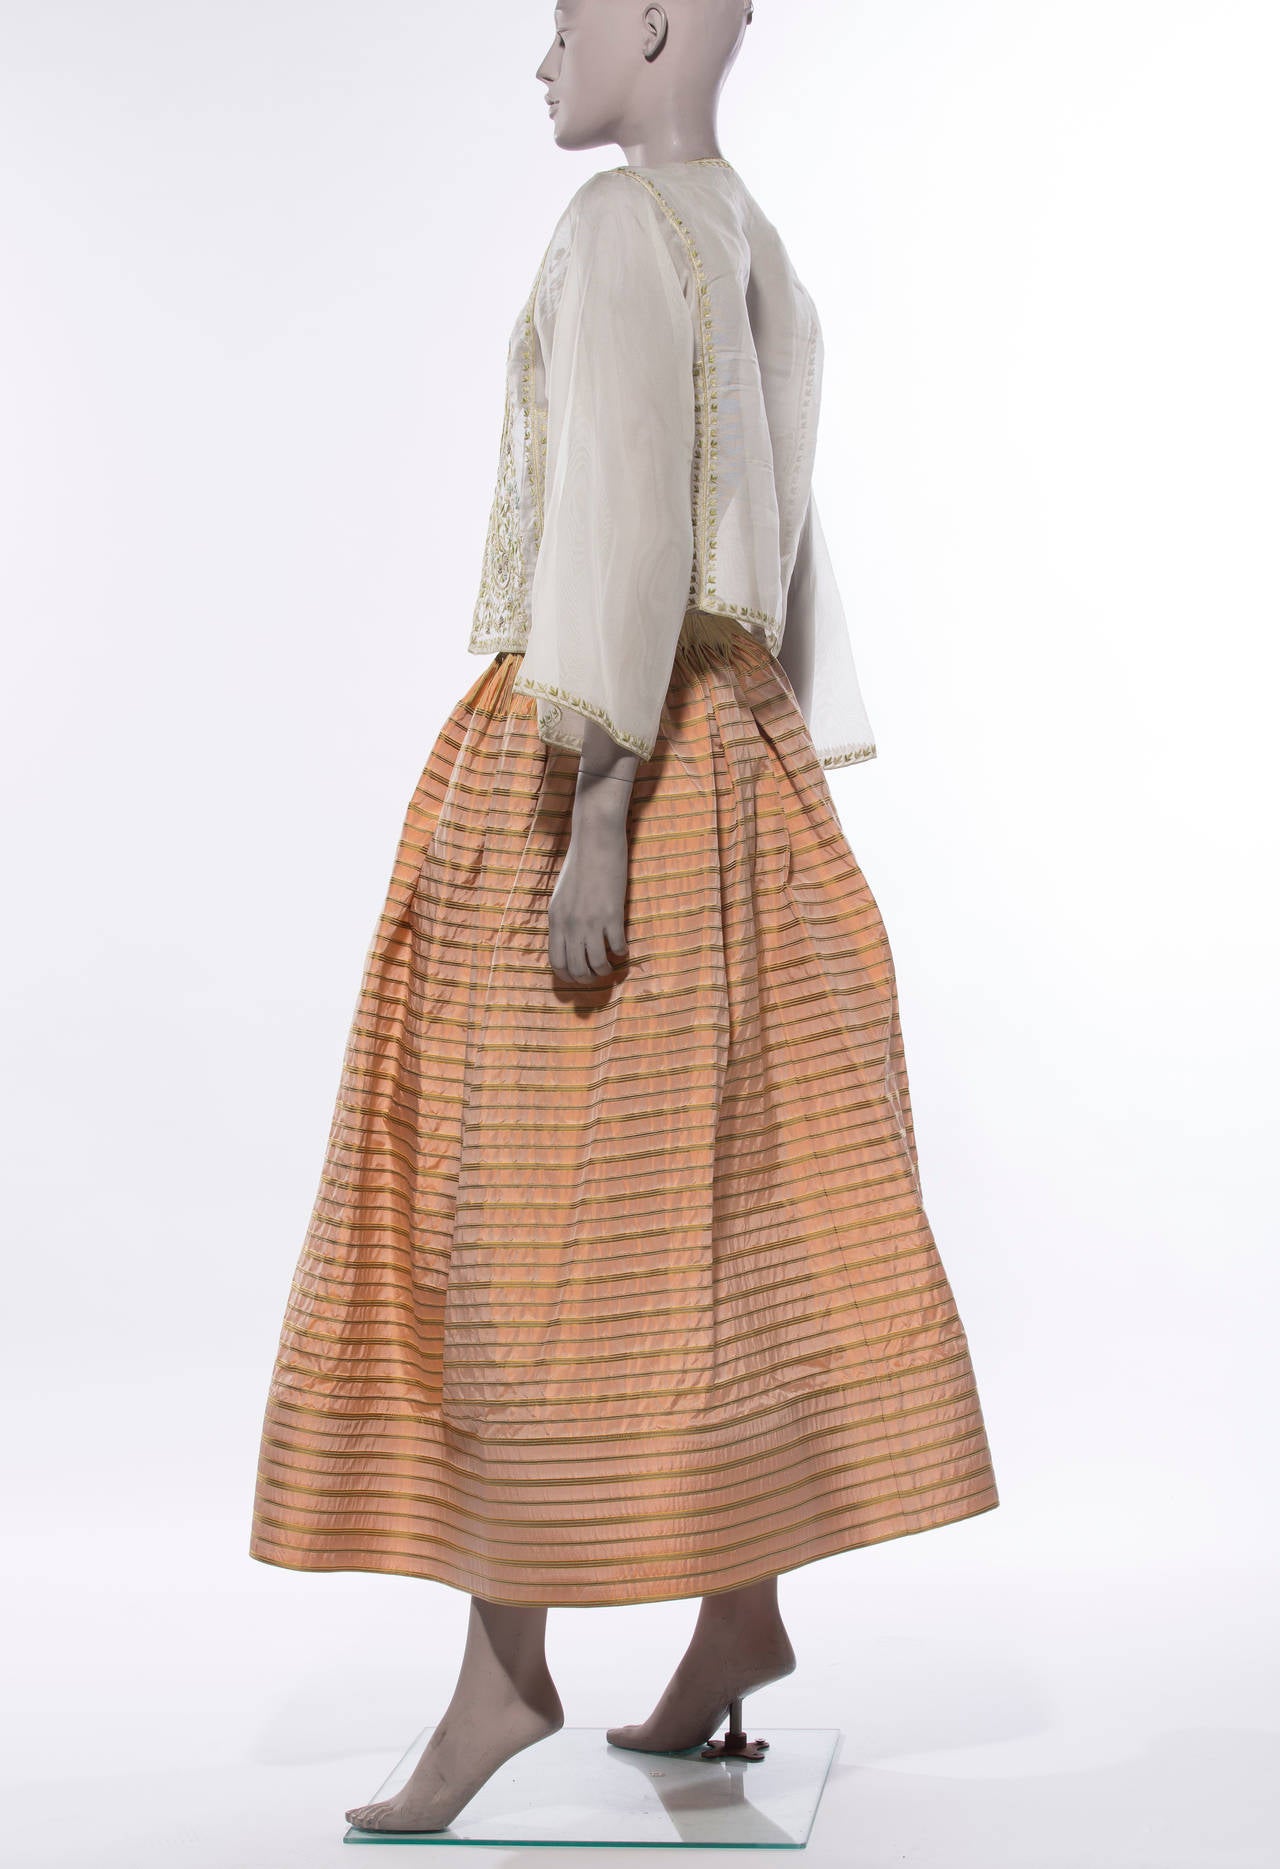 Oscar de la Renta, circa 1990's skirt ensemble. Skirt consists of striped silk taffeta, two front pockets and side snap and hook & eye closure with 6 inch boning at bottom. Floral embroidered, lightweight jacket with hook & eye closure and tassel